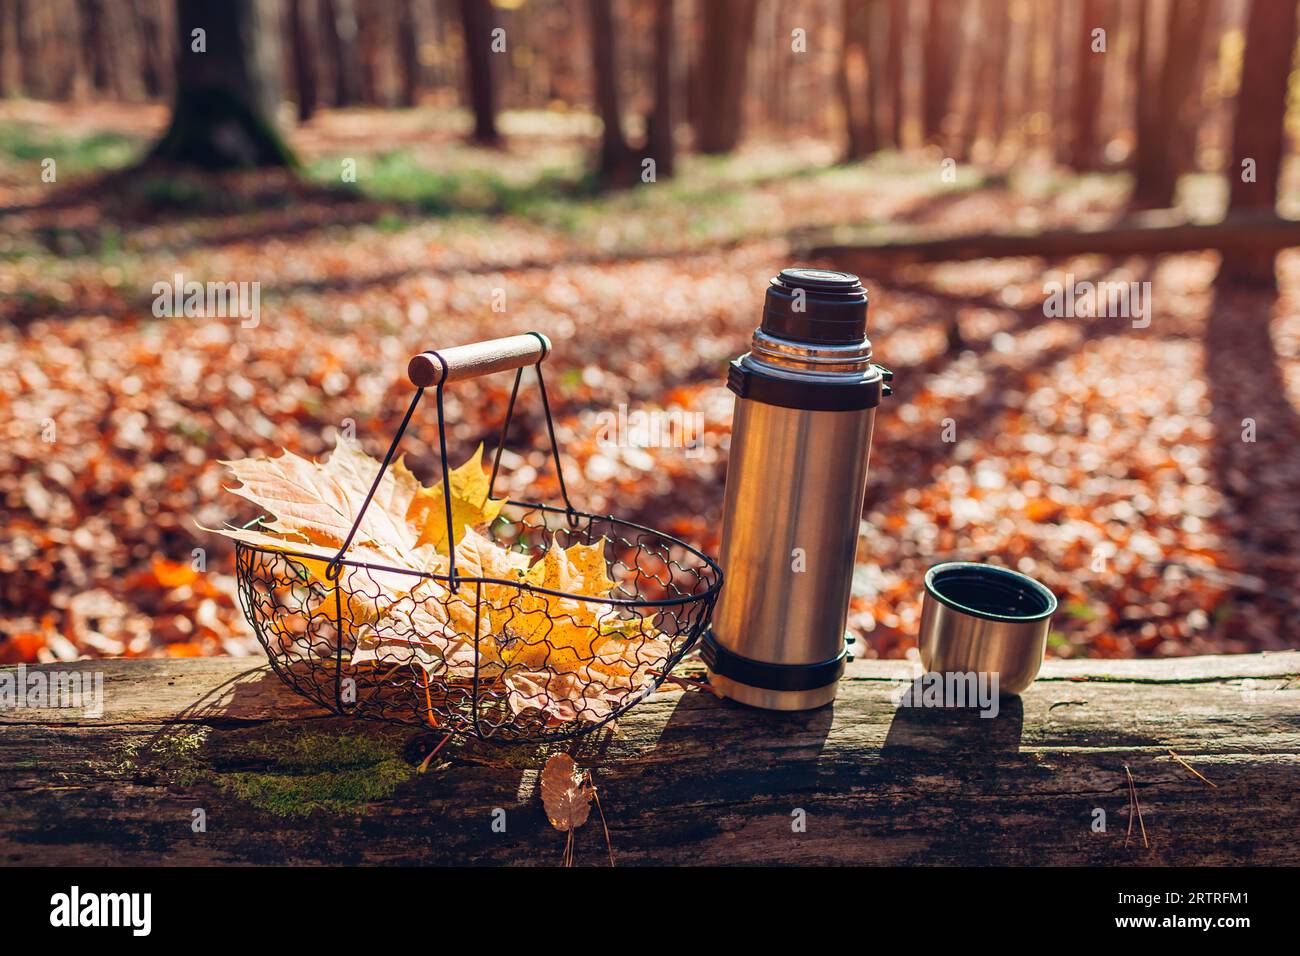 Hot Tea In Thermos For A Walk In The Woods While Resting Stock